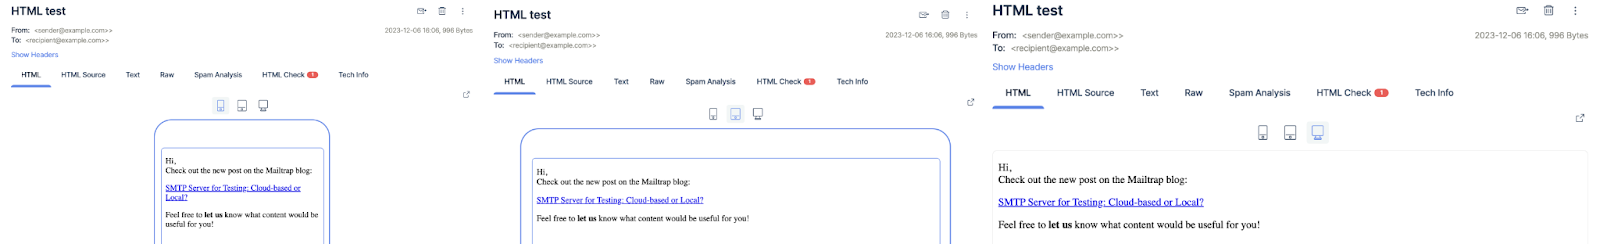 Desktop, mobile, and tablet previews in Mailtrap Email Testing 